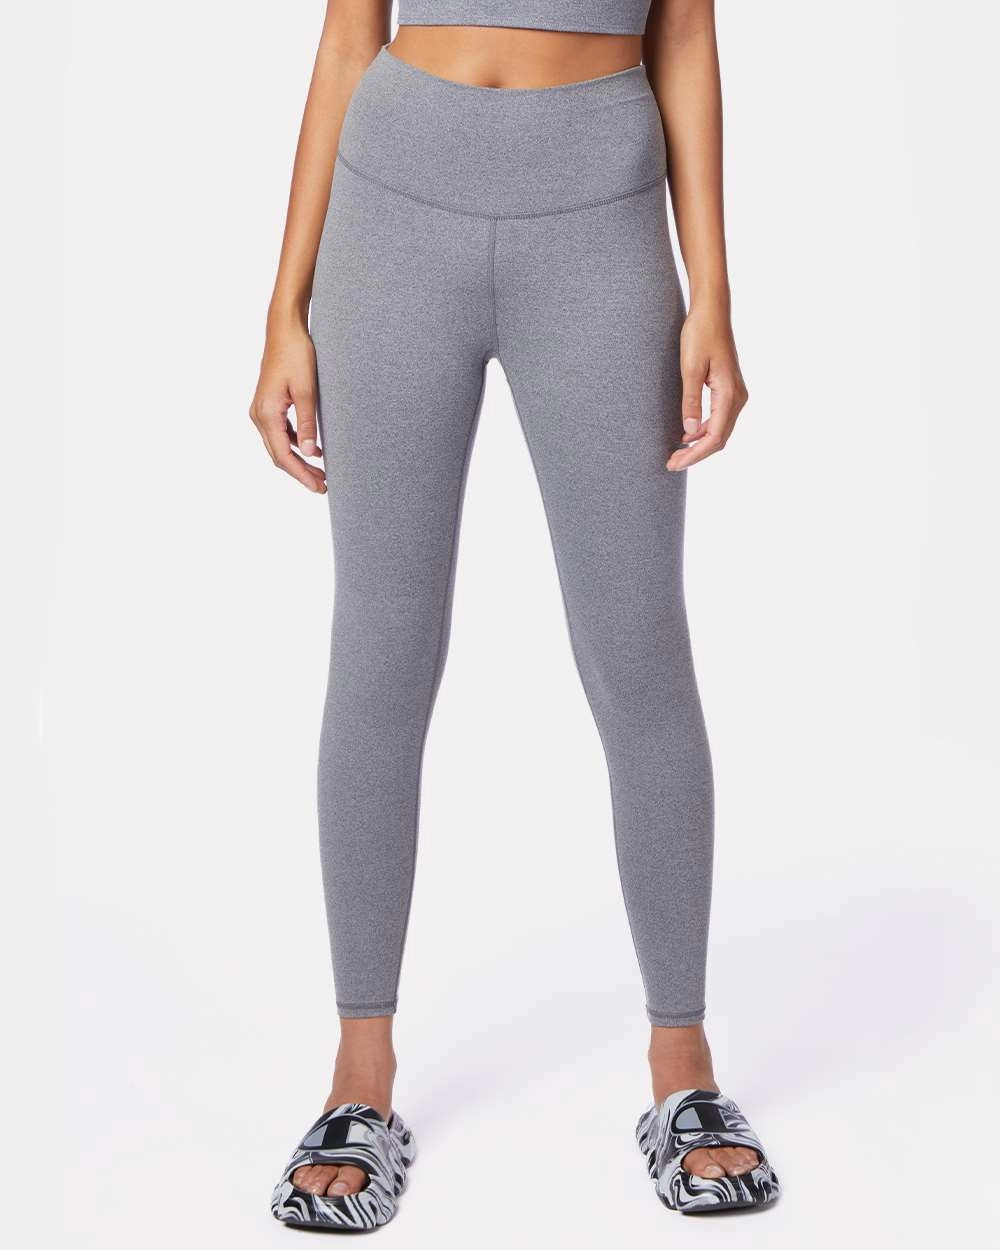 Champion Clothing CHP120 Women's Sport Soft Touch Leggings - From